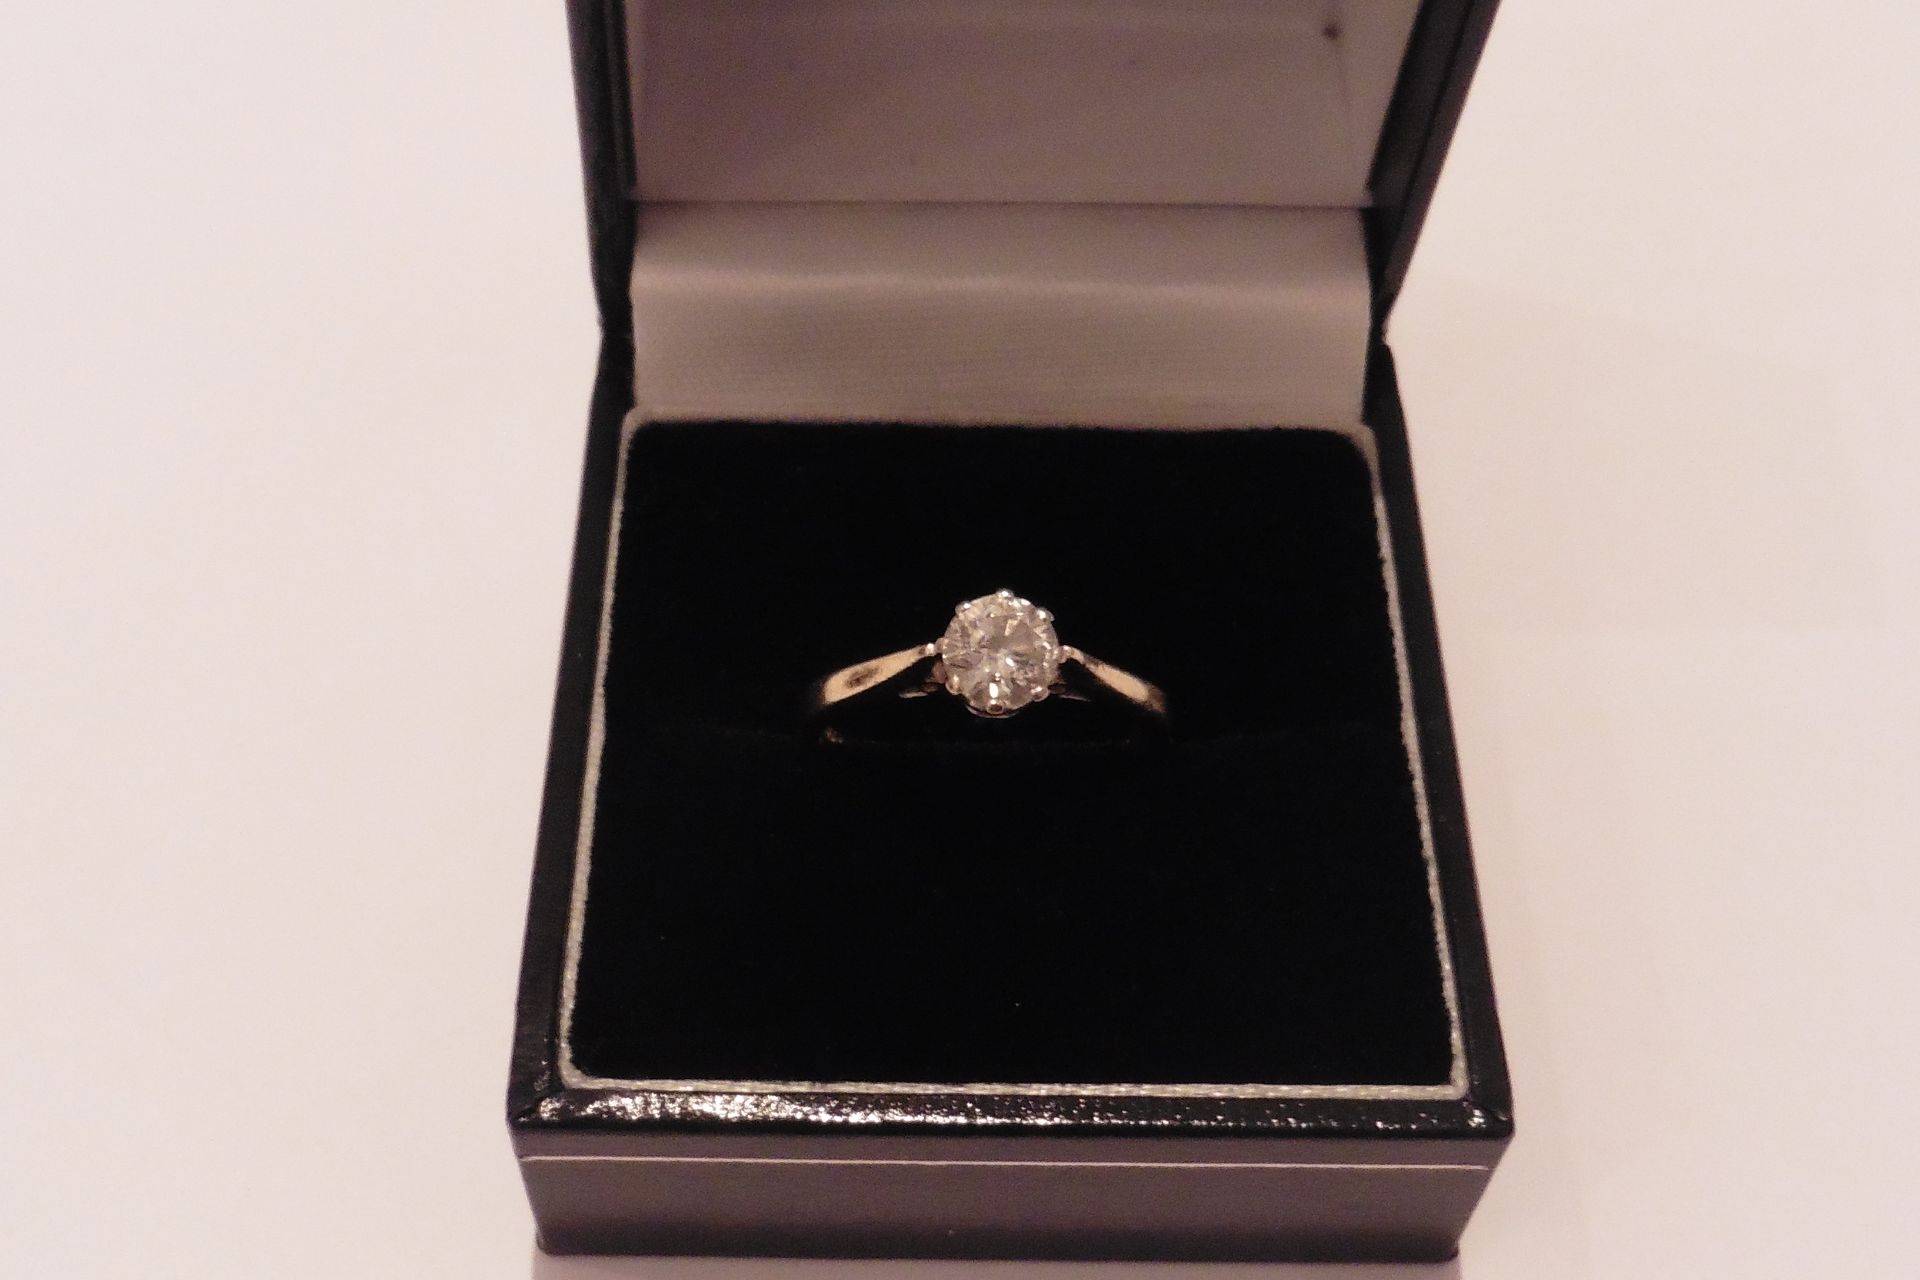 Pre-owned 18ct gold solitaire ring set with a brilliant cut diamond weighing 0.50ct.  Secured in a 8